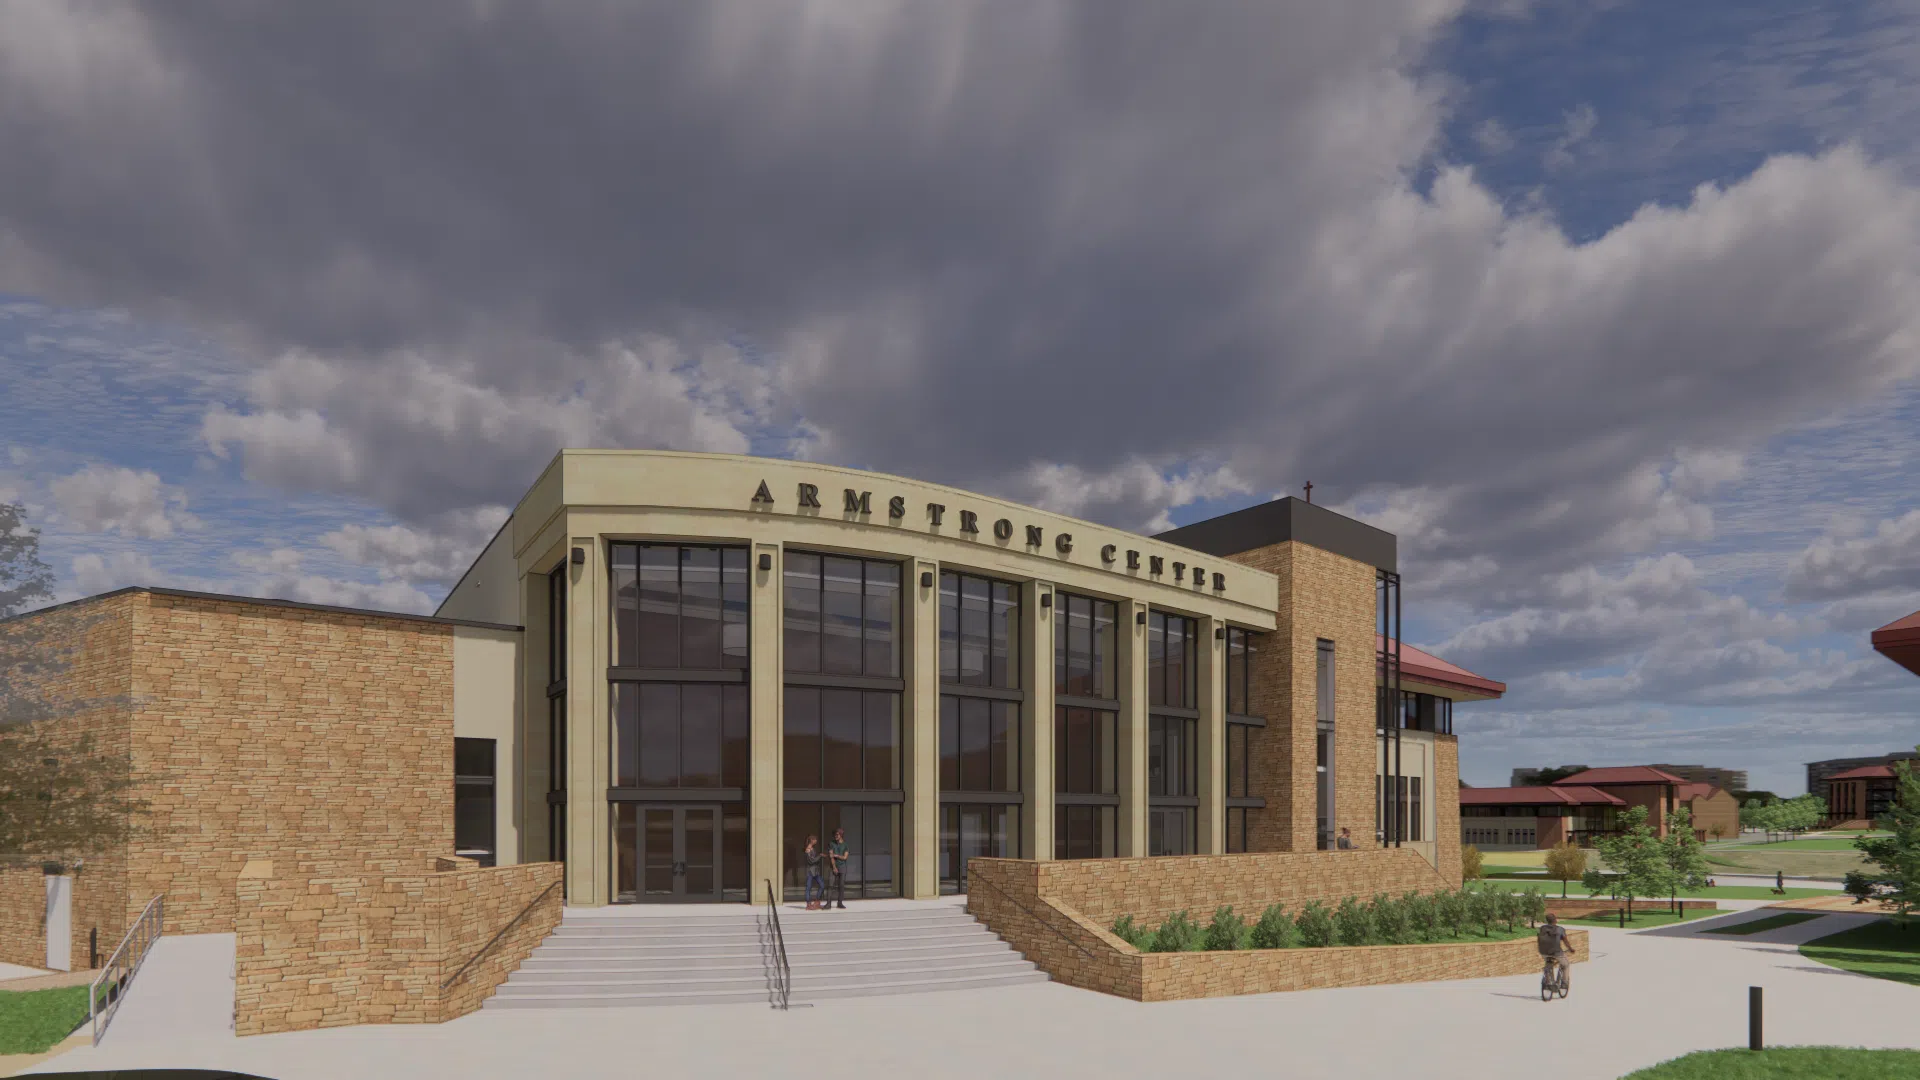 Named in honor of former CCU President Bill Armstrong, the Armstrong Center will continue the transformation of CCU's Lakewood campus into a world-class training ground for future business, church, and world leaders.